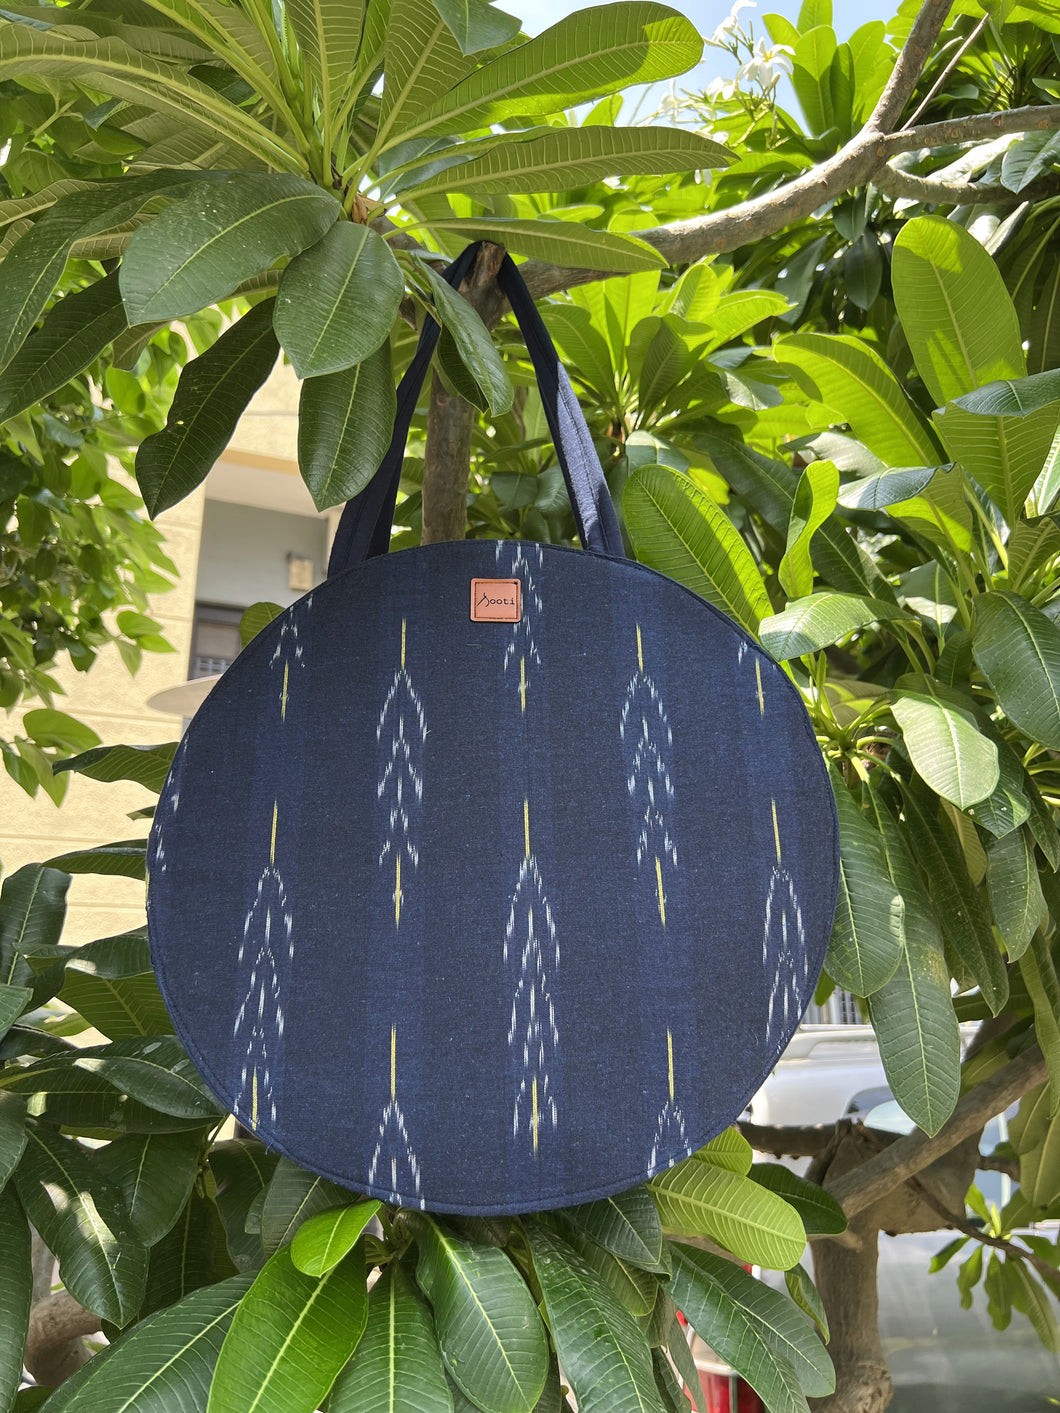 Round Ikat Tote Bags for those casual times and vacation days. Spacious enough to keep all your belongings.